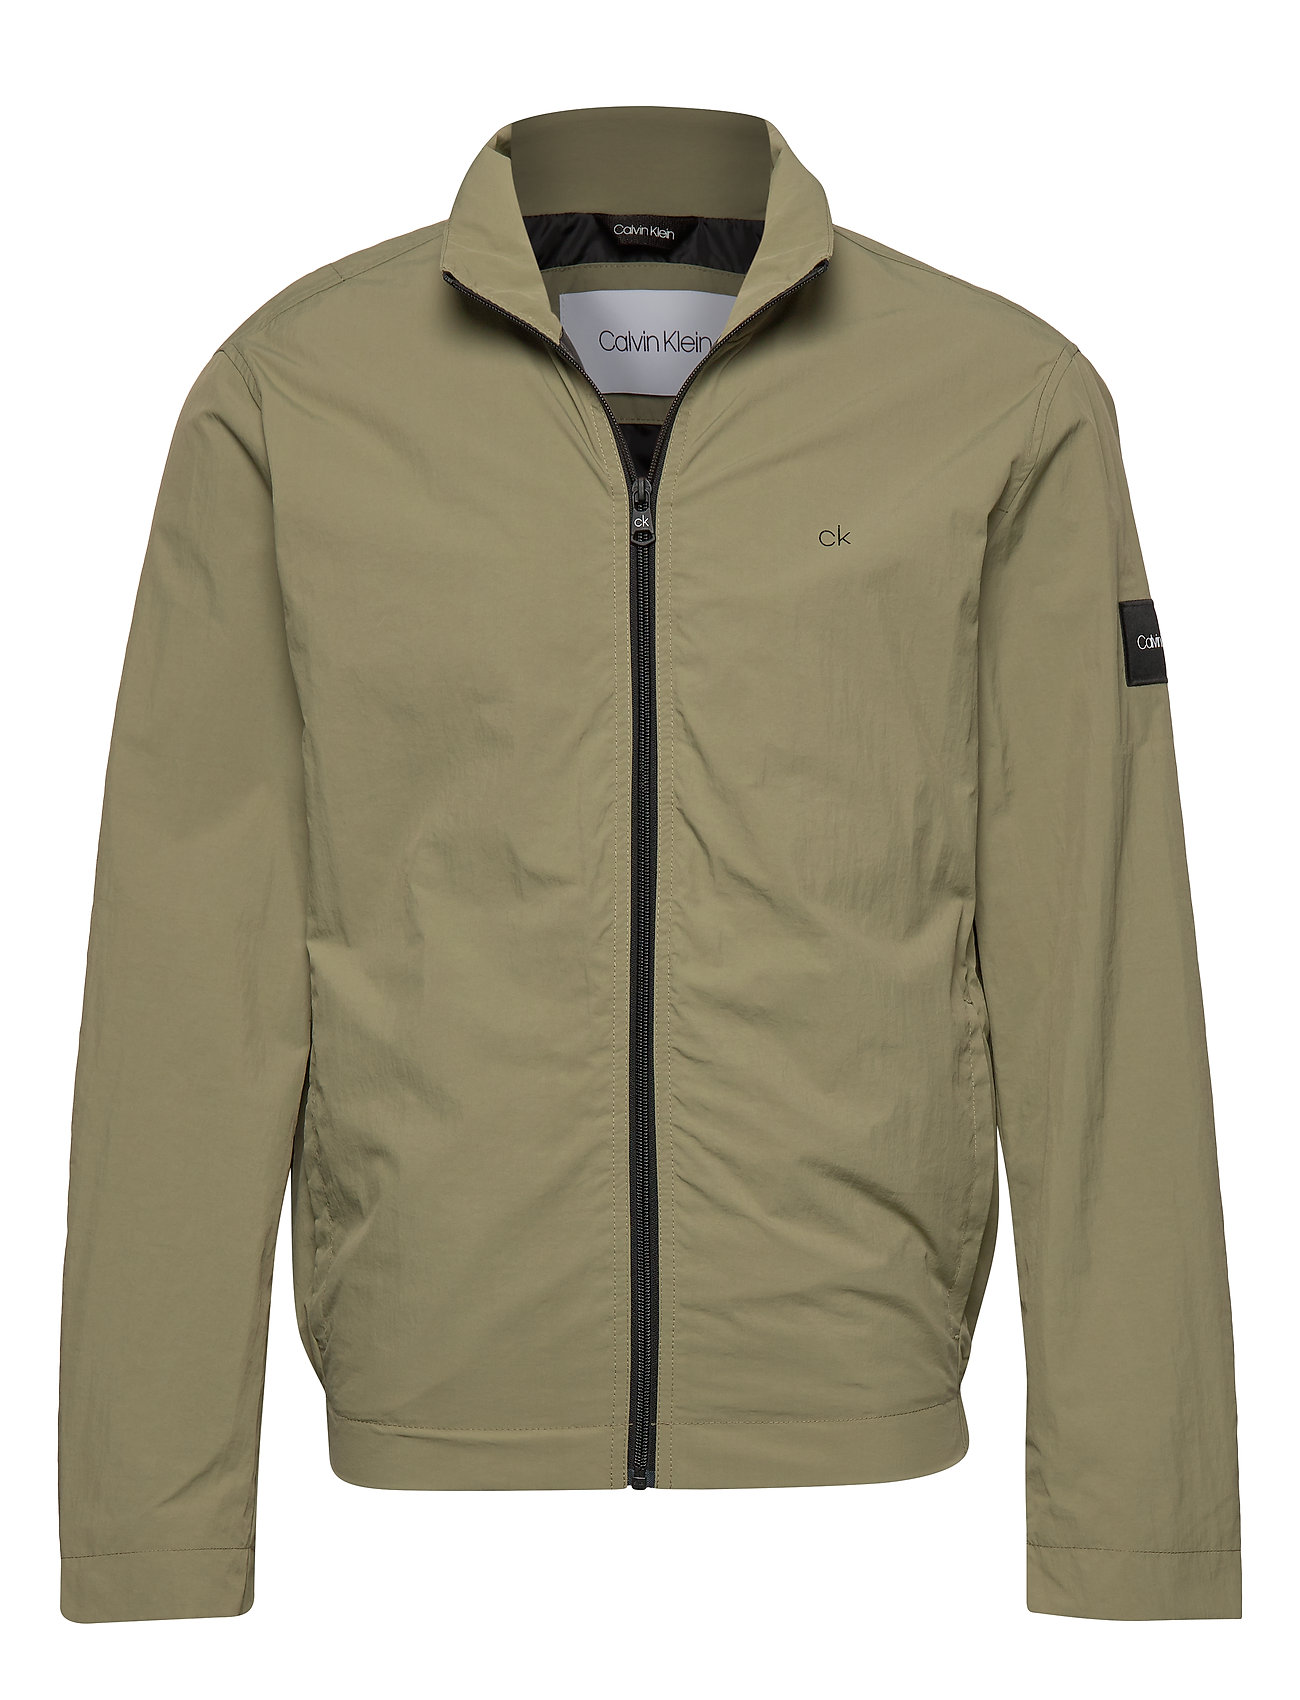 Calvin Klein Green Jacket Clearance, 60% OFF | lagence.tv